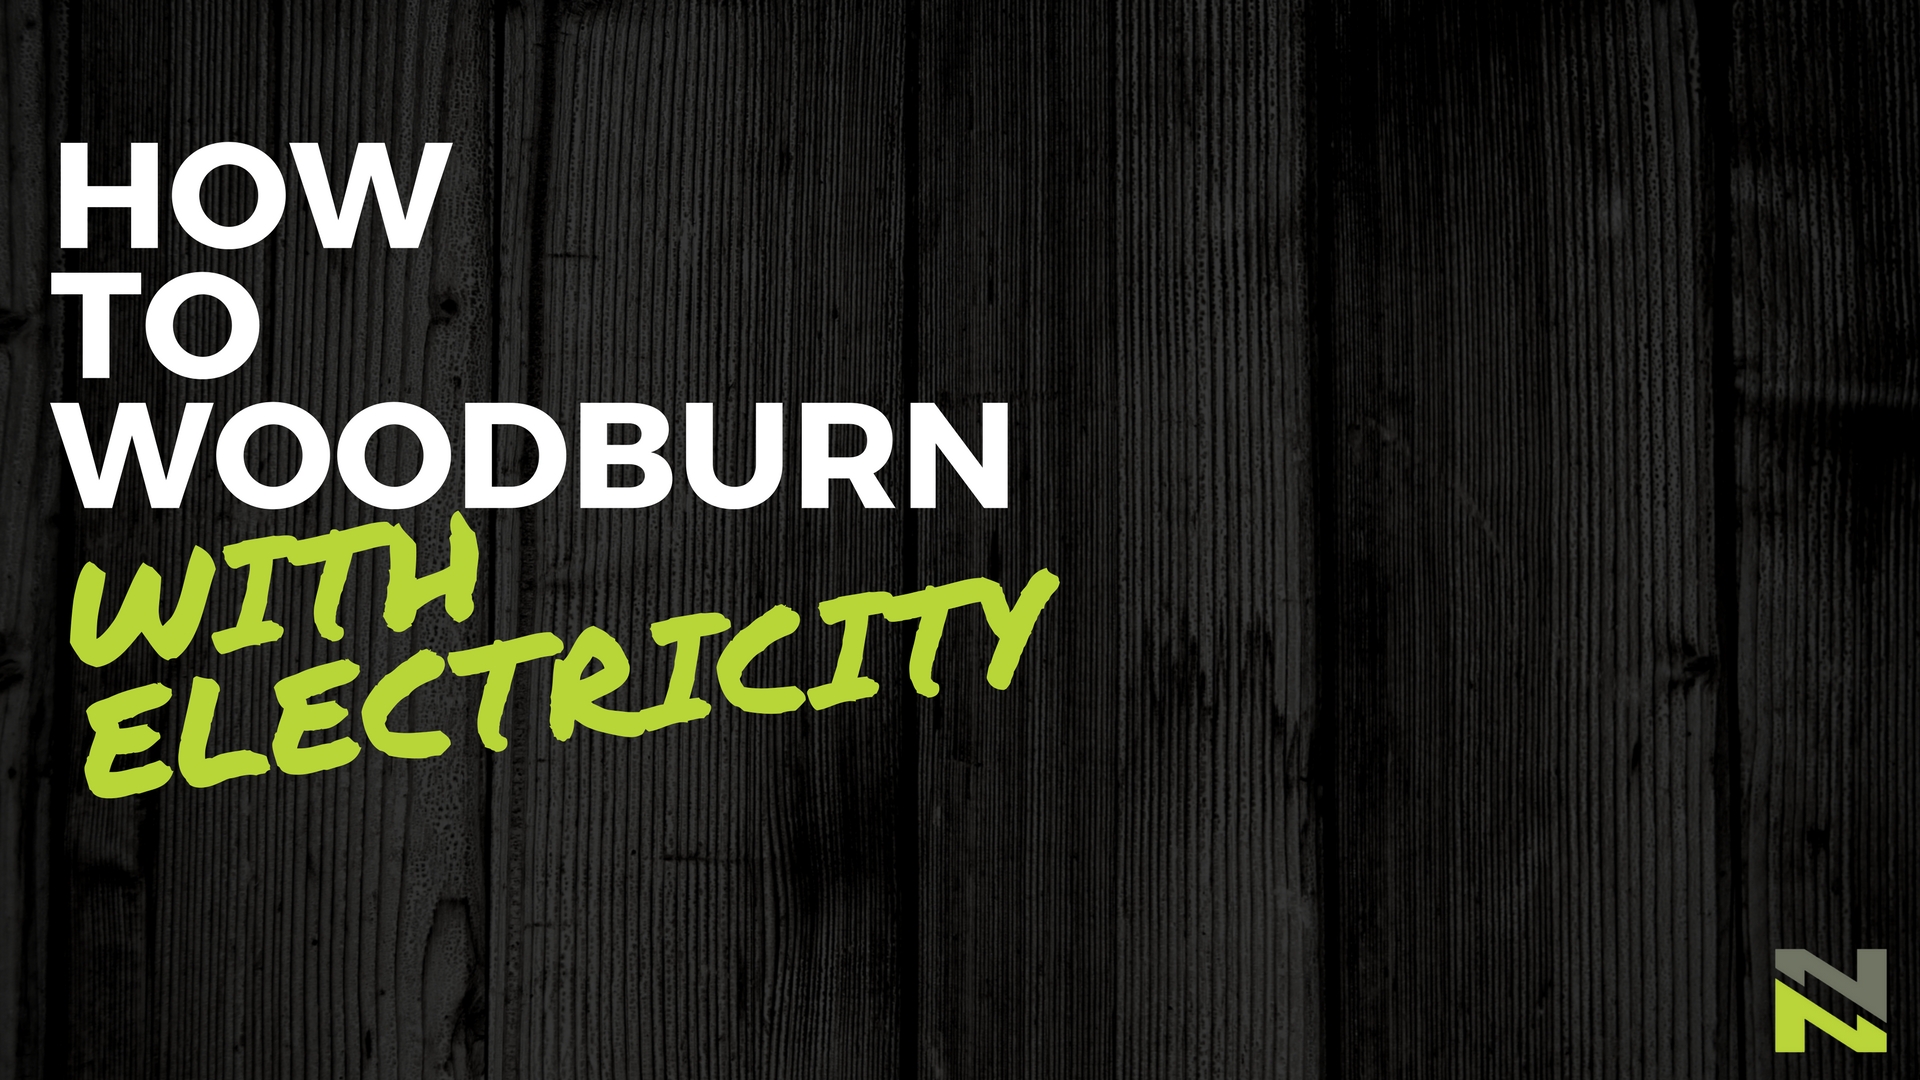 How to Woodburn with Electricity